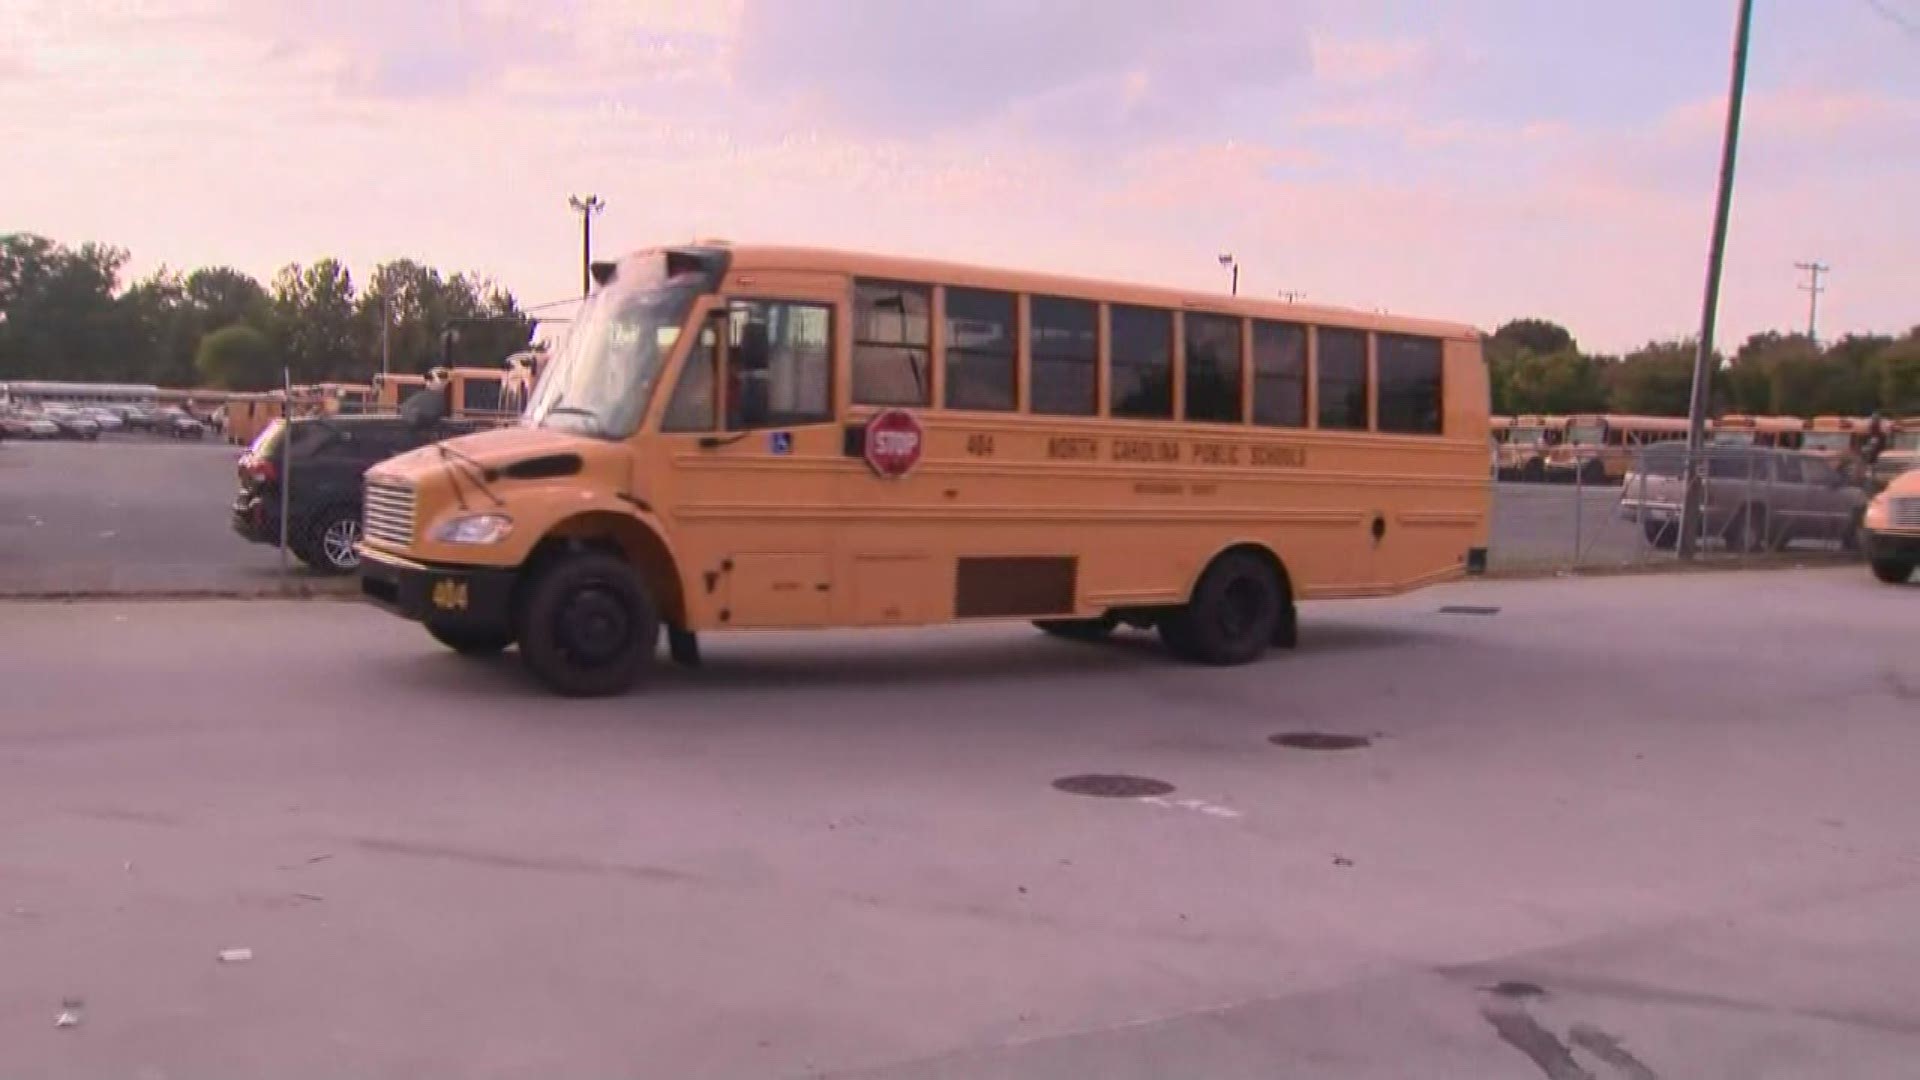 NBC Charlotte has learned there have been three separate school bus assaults in the last two weeks.